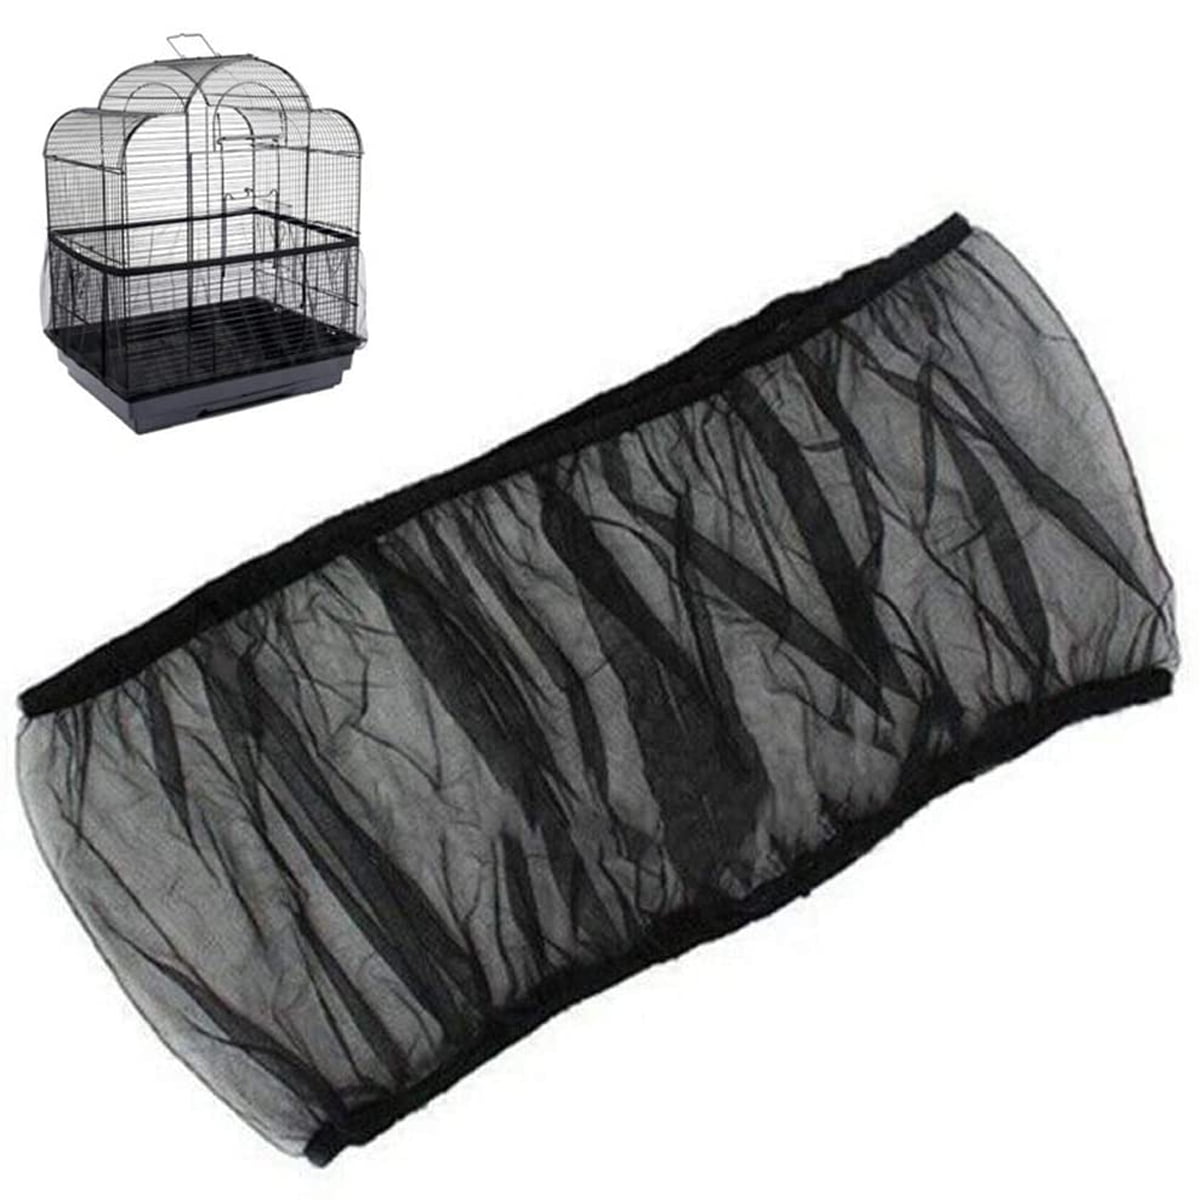 Bird Cage Cover Birdcage Cover Lightproof and Breathable Birdcage Cage Adjustable Drawstring Skirt Mesh Net Cover White 